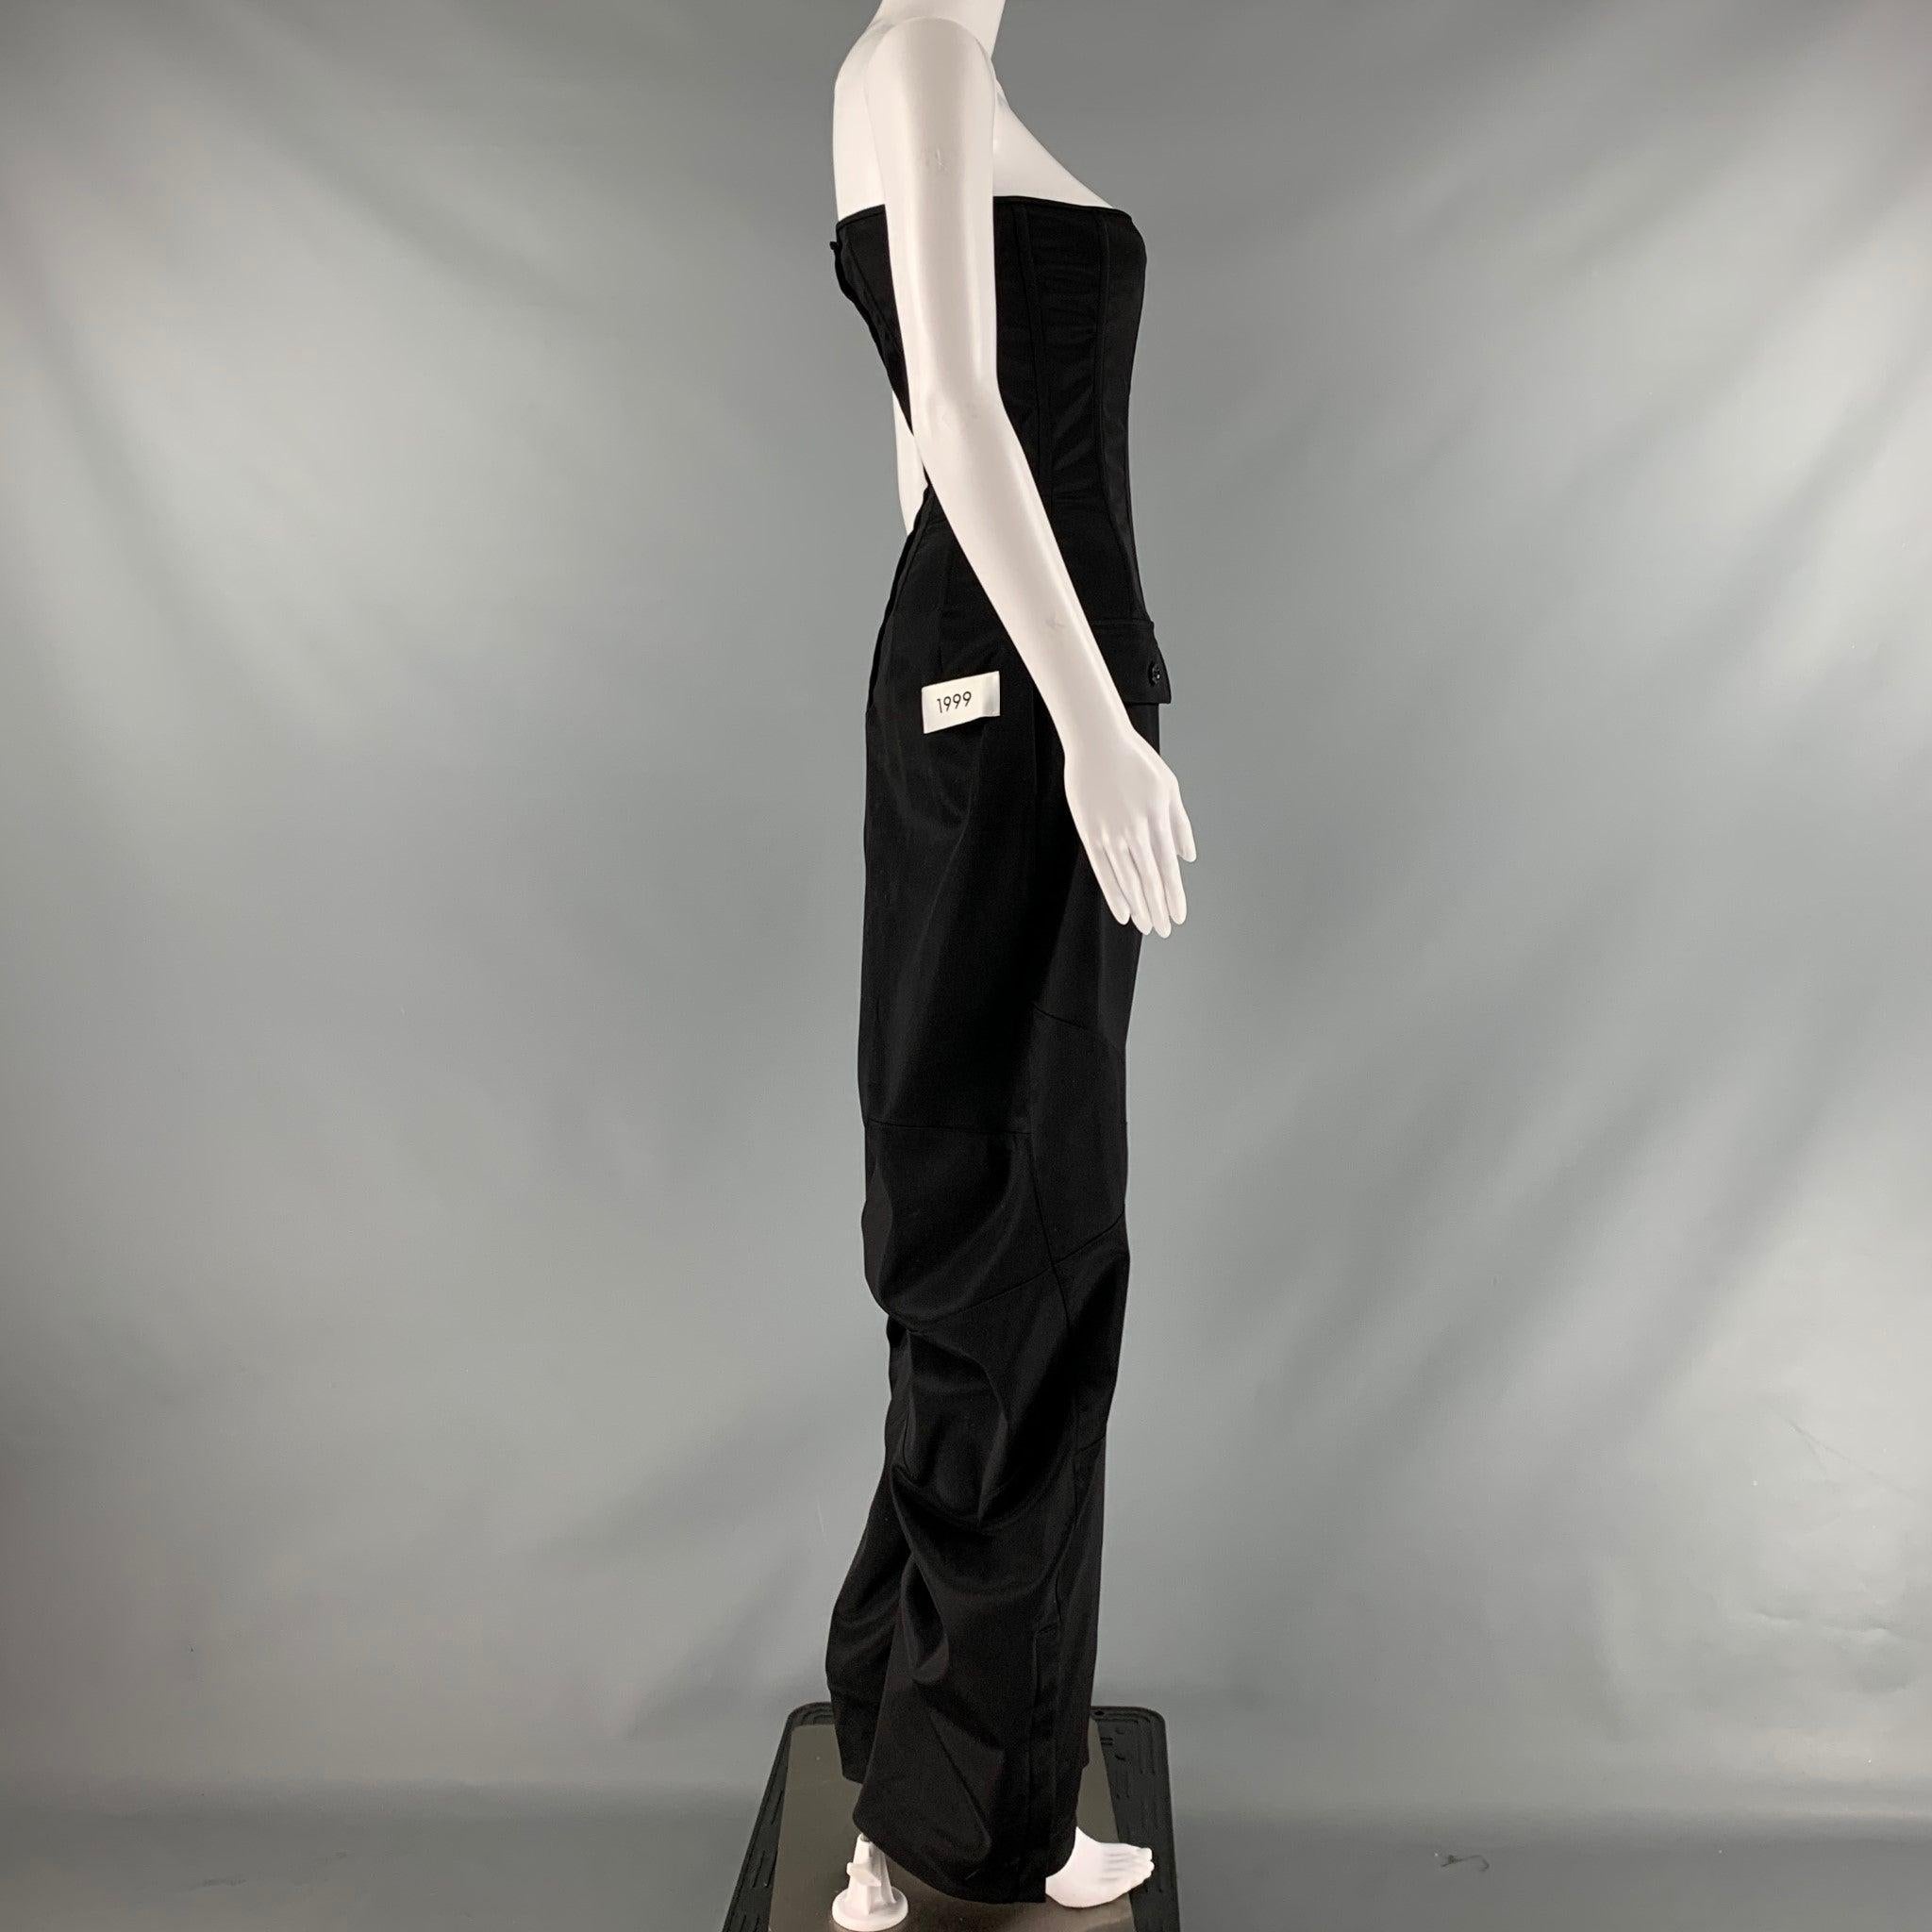 DOLCE & GABBANA KIM jumpsuit comes in black acetate blend knit material featuring a corset design, wide-leg, cargo style, and hook and eye closure. Made in Italy.Excellent Pre-Owned Condition. Minor sing of wear. 

Marked:   40 

Measurements: 
 